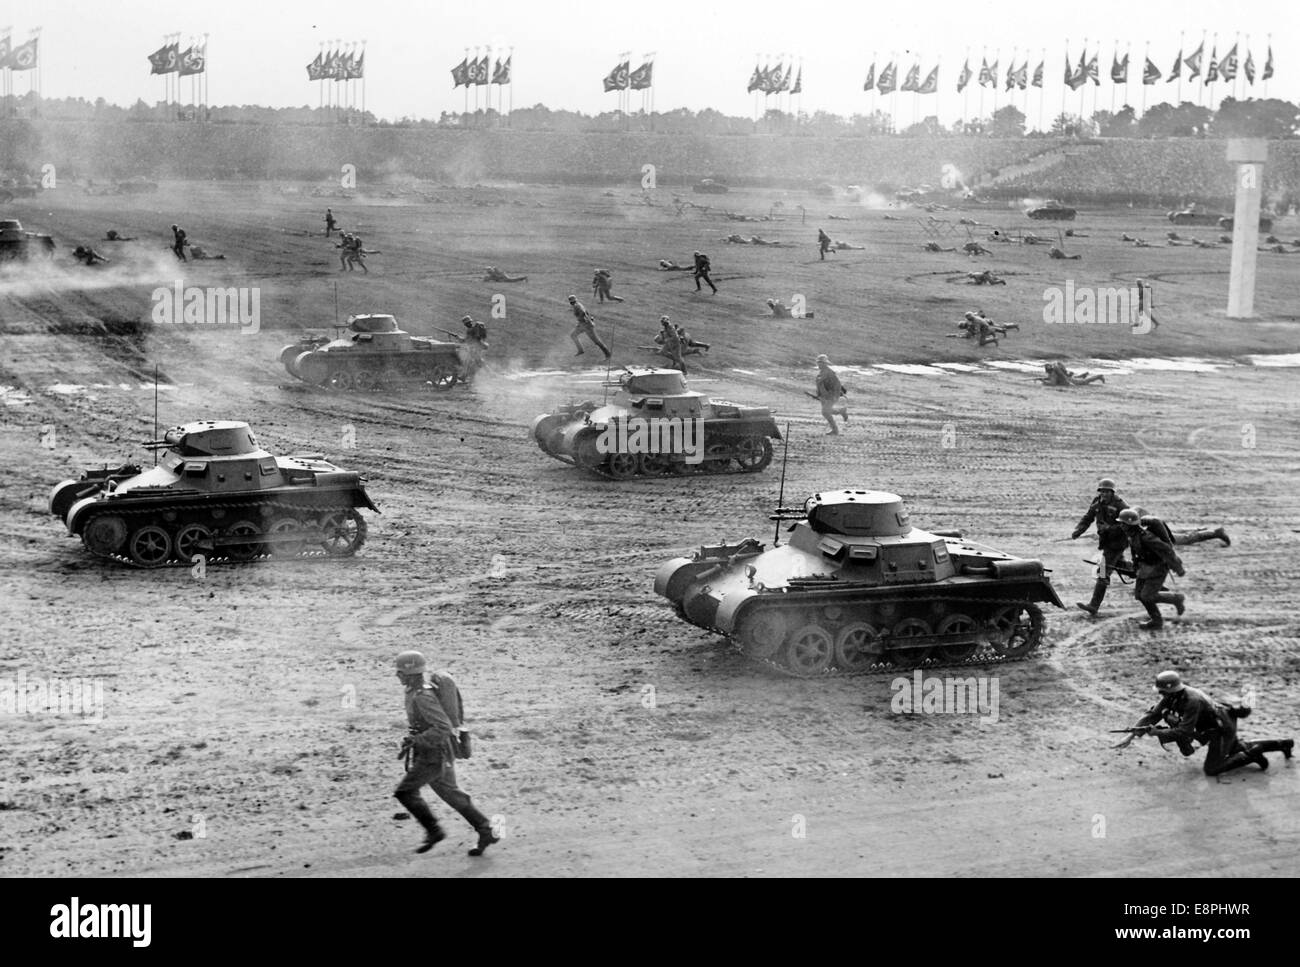 Nuremberg Rally 1937 in Nuremberg, Germany - Nazi party rally grounds - Demonstration by the Nazi armed forces (Wehrmacht) on Zeppelin Field. Here: advancing tanks and infantry. (Flaws in quality due to the historic picture copy) Fotoarchiv für Zeitgeschichtee - NO WIRE SERVICE - Stock Photo